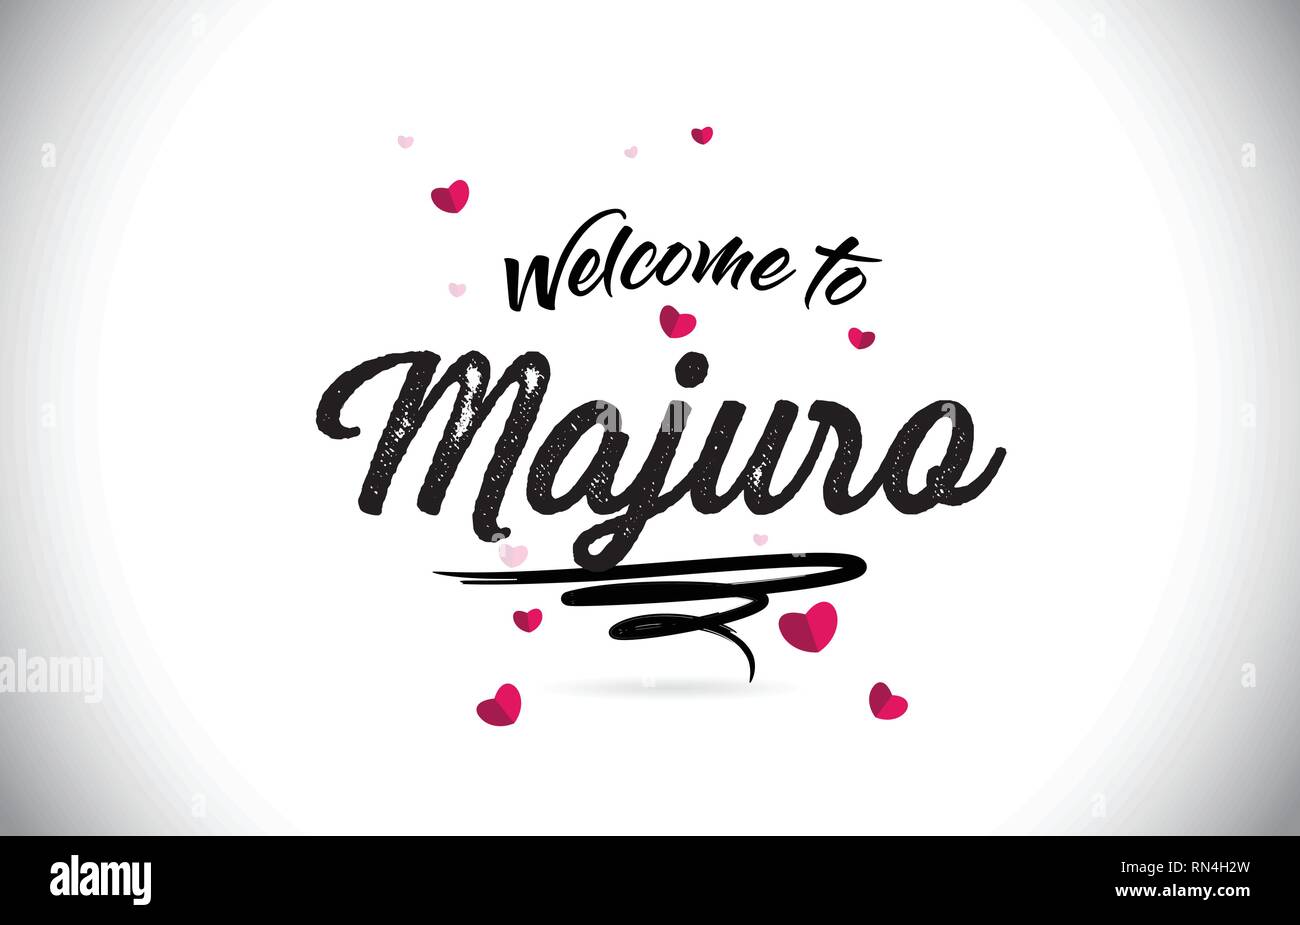 Majuro Welcome To Word Text with Handwritten Font and Pink Heart Shape Design Vector Illustration. Stock Vector